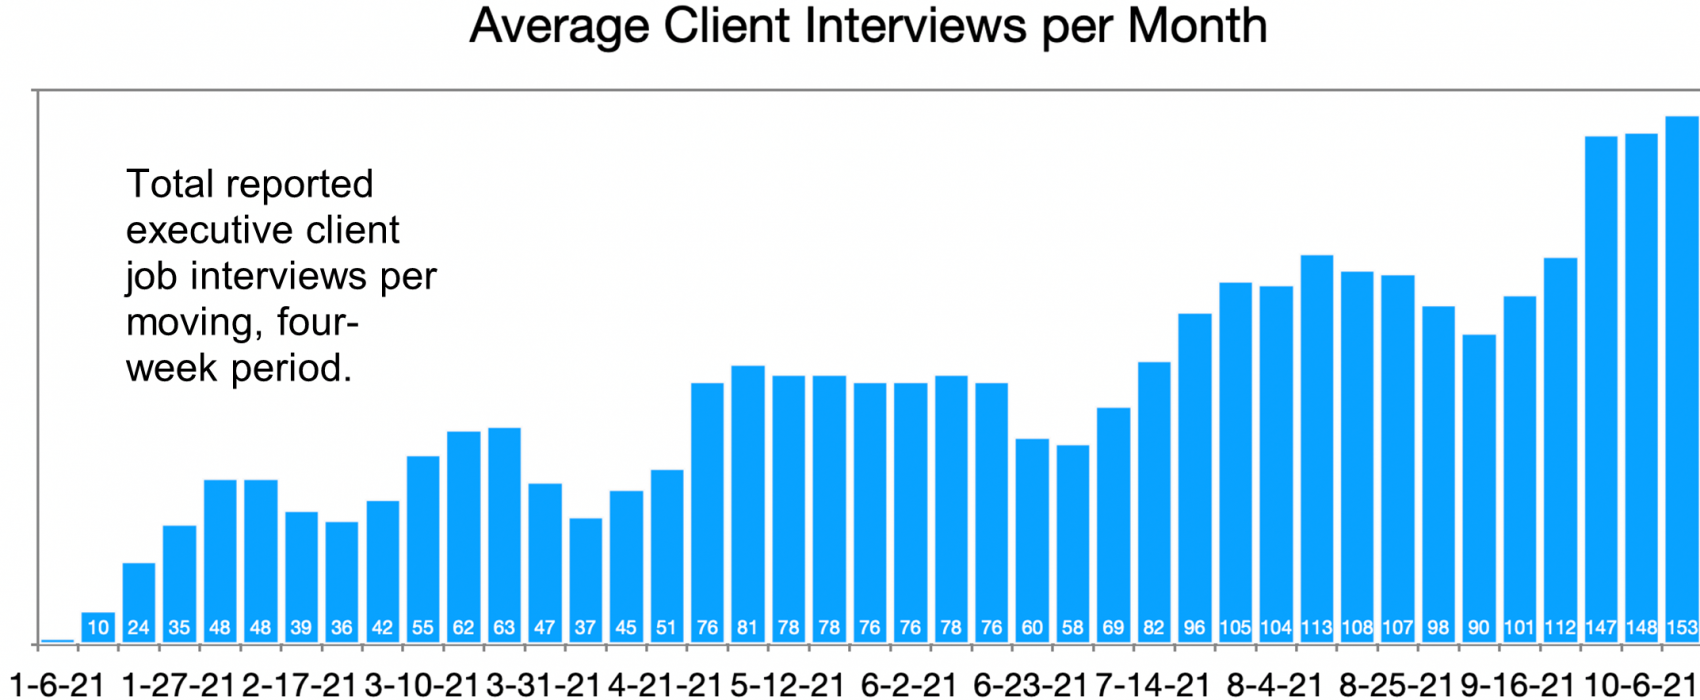 Horse in the Kitchen. Average Client Interviews per Month graphic